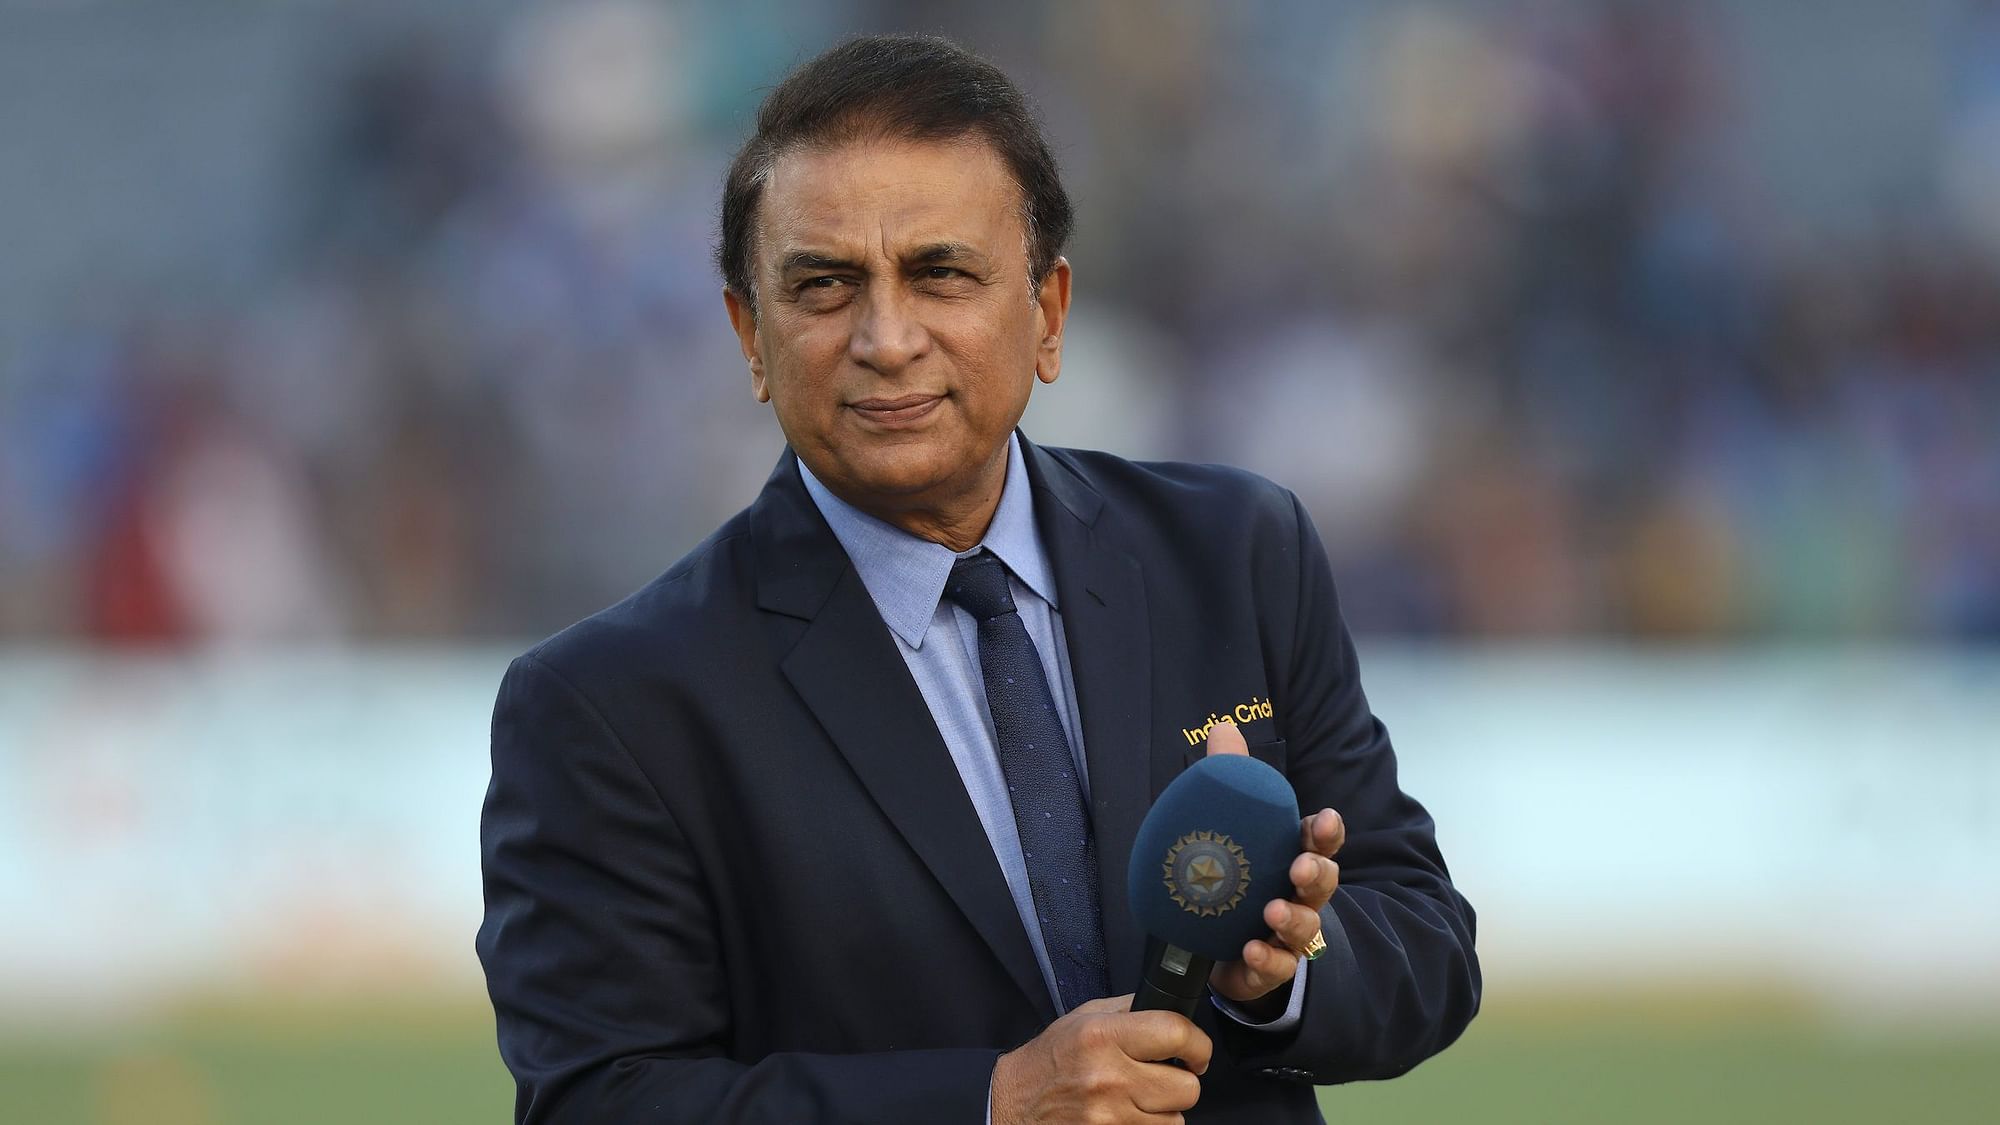 Sunil Gavaskar says it’s more likely Lahore will receive snowfall but a India-Pak bilateral series isn’t possible.